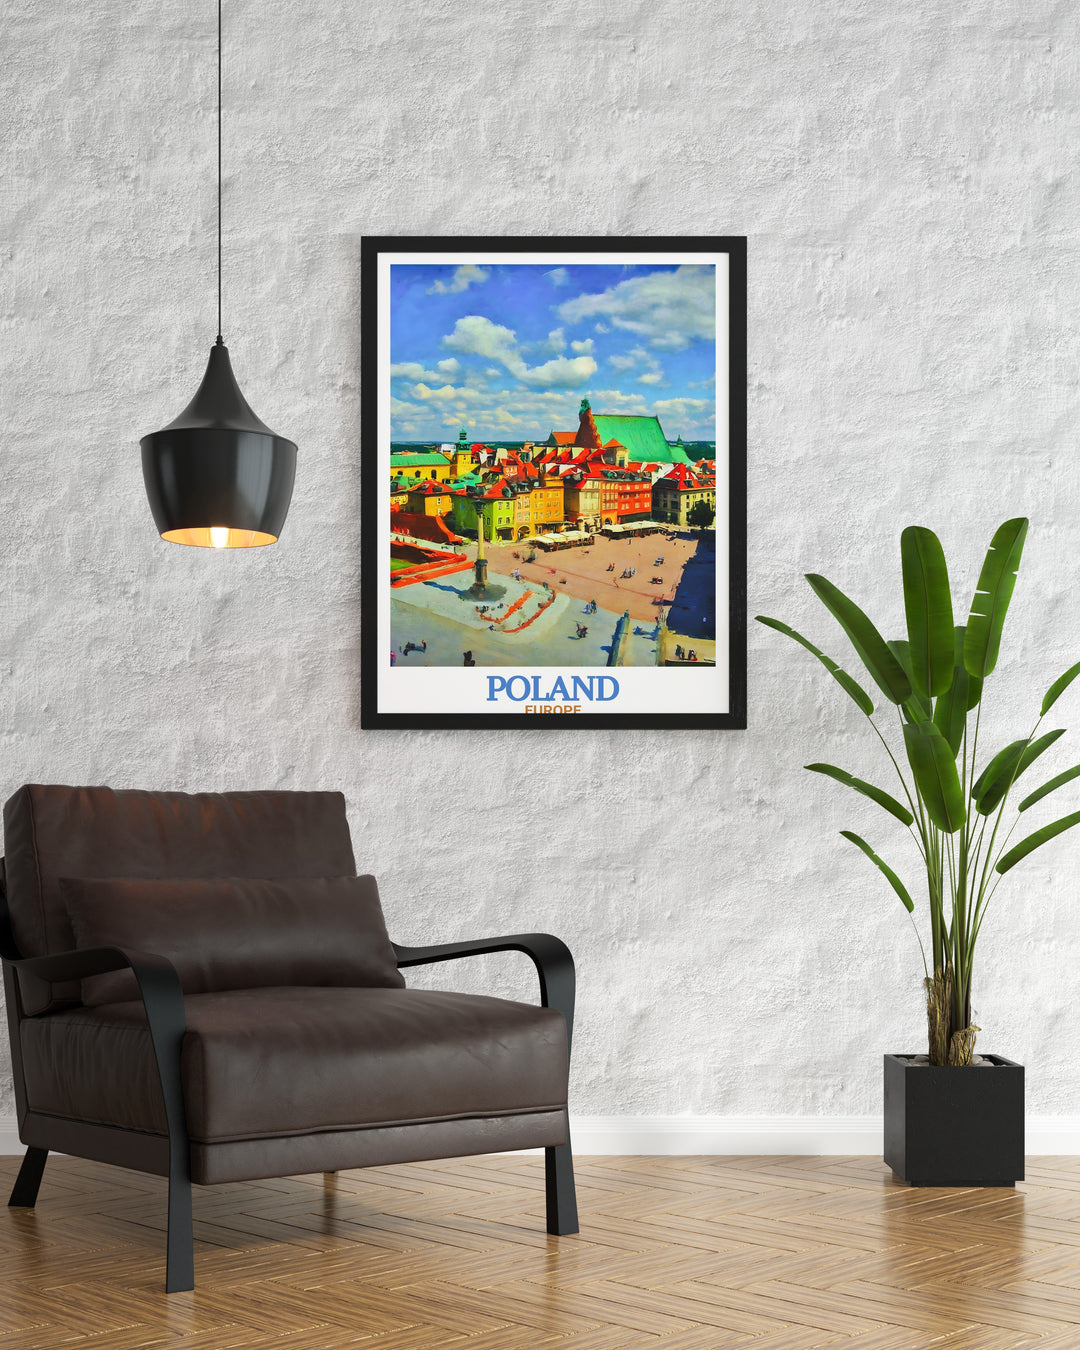 Personalized Gift featuring Zakopane Photography and Warsaw Old Town a beautiful piece of wall art that celebrates Polands natural beauty and architectural splendor perfect for Christmas gifts or birthday gifts adding charm to any space